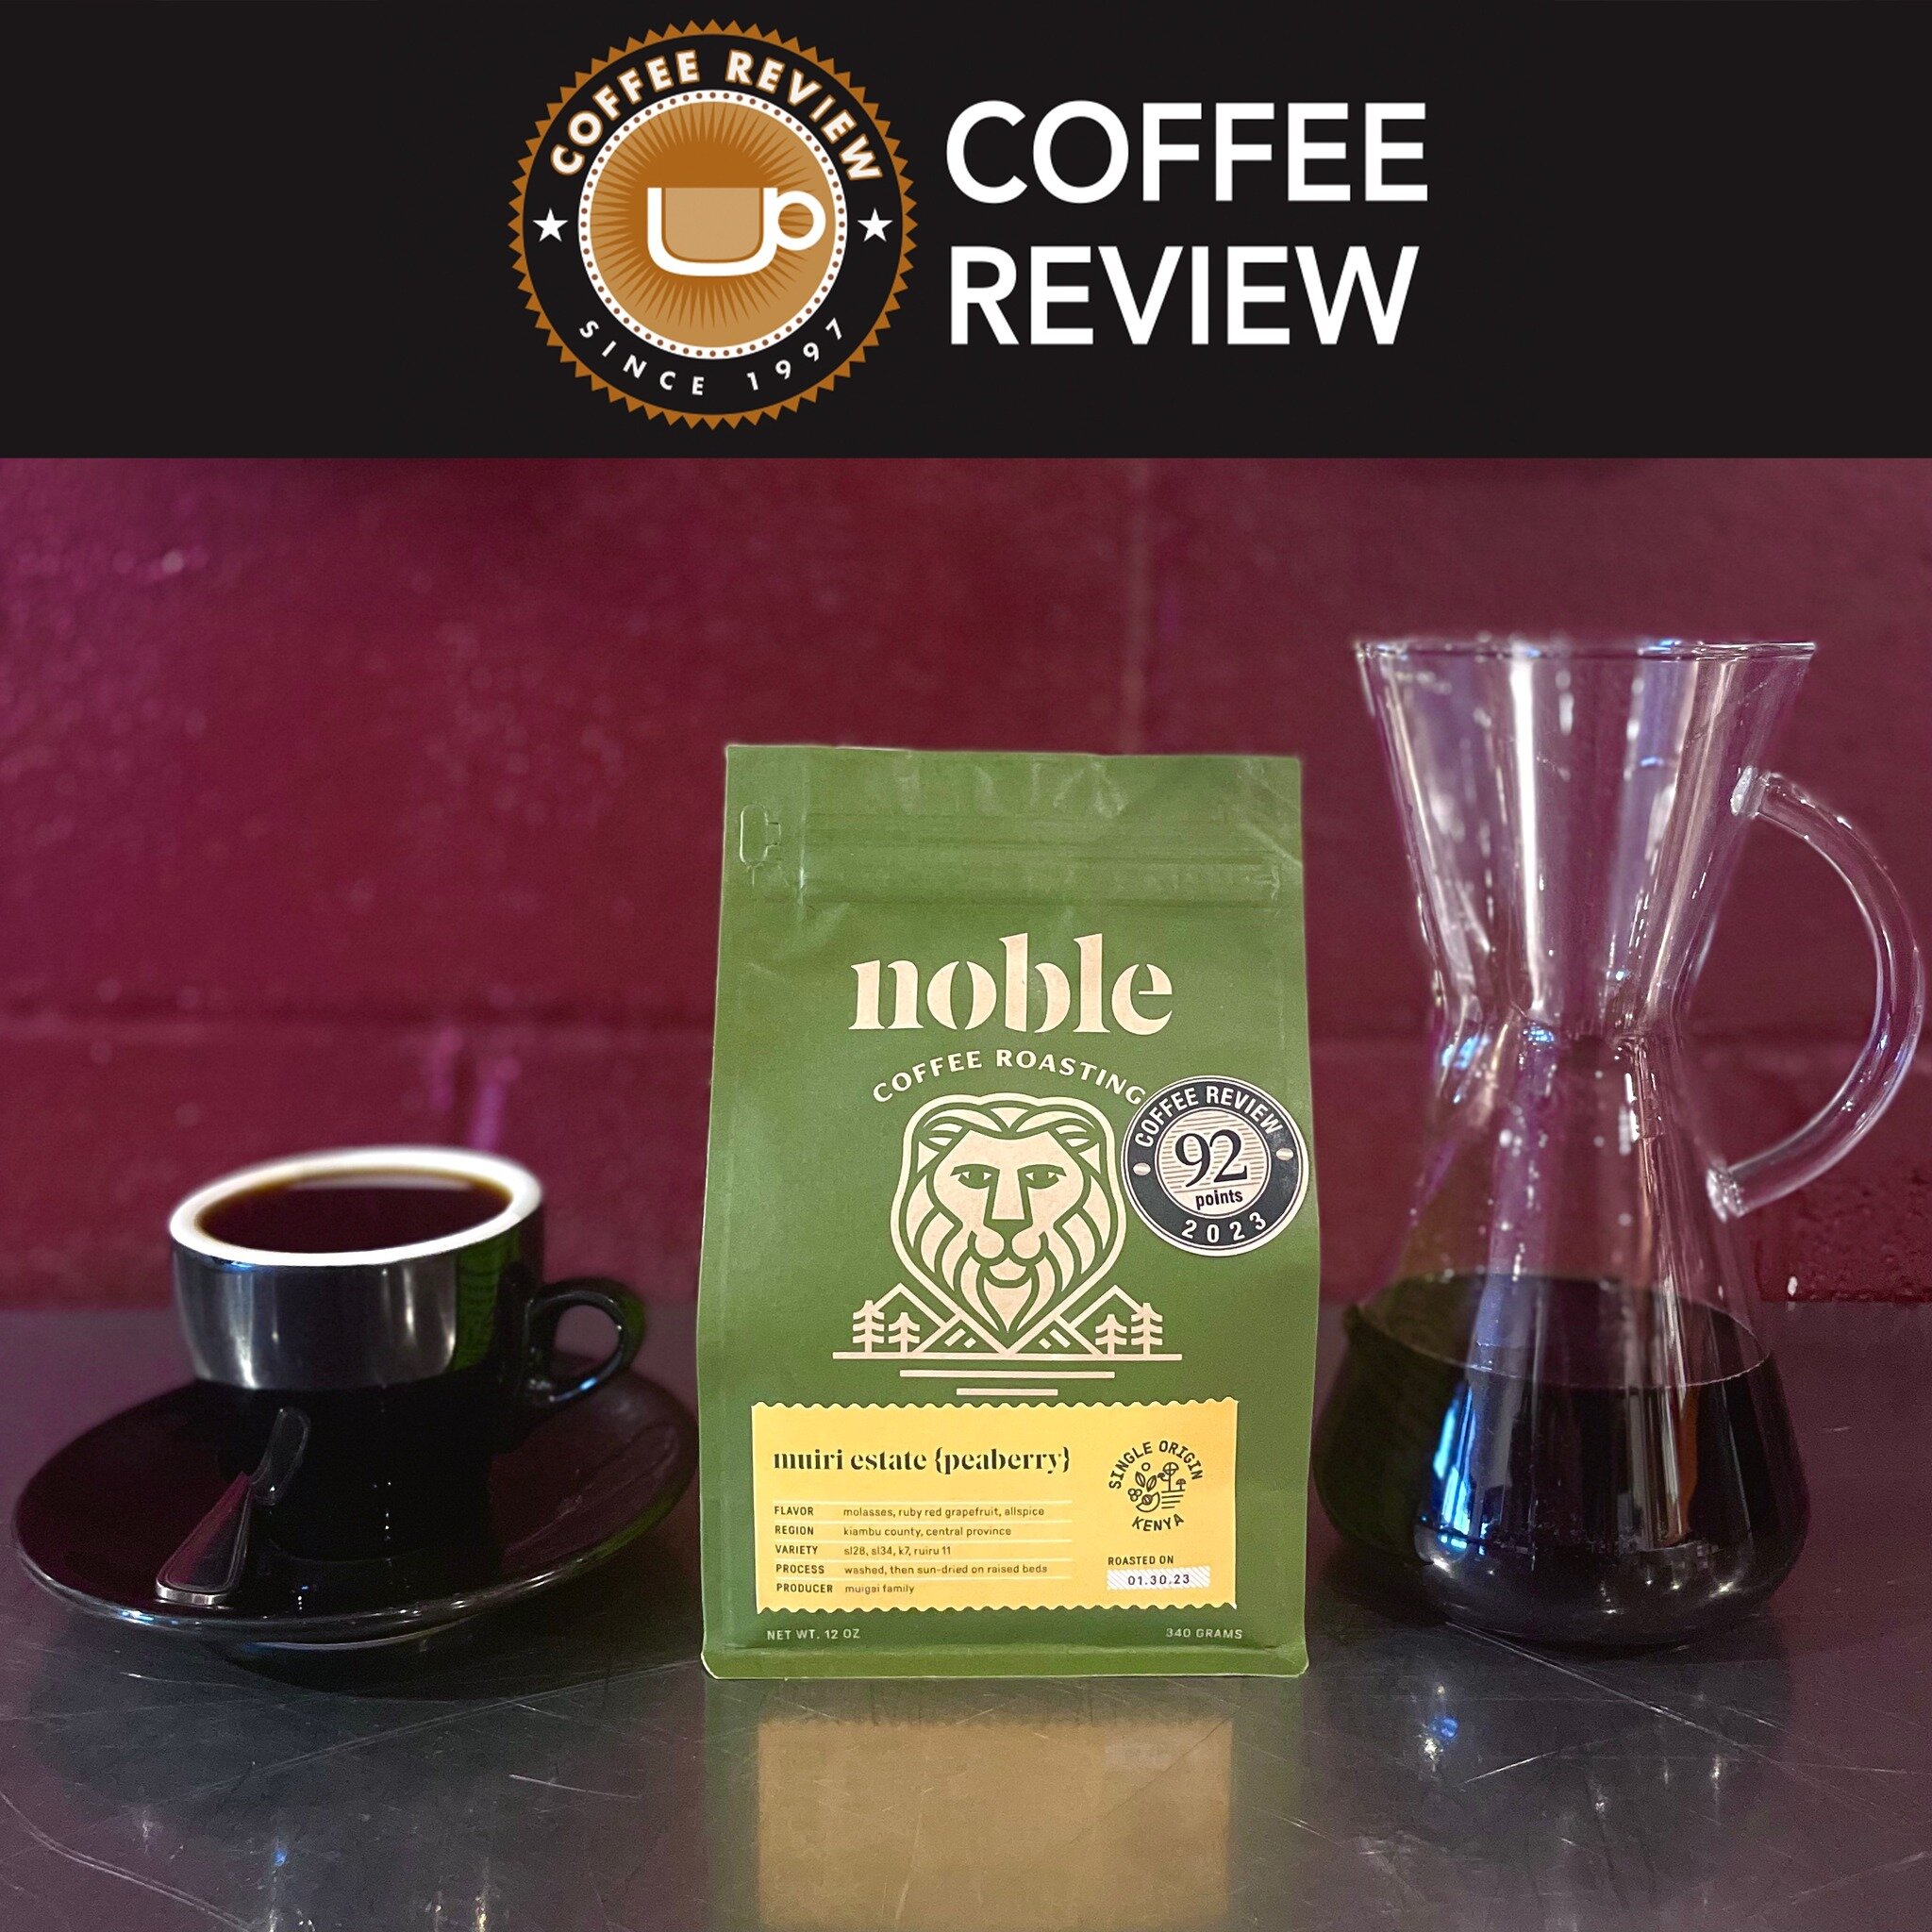 Coffee Review was founded in 1997 by Kenneth Davids and Ron Walters. They introduced the first-ever 100-point, wine-style coffee reviews to the specialty coffee industry. They recently published an article called &lsquo;Warm Your Bones With 10 Ski Co